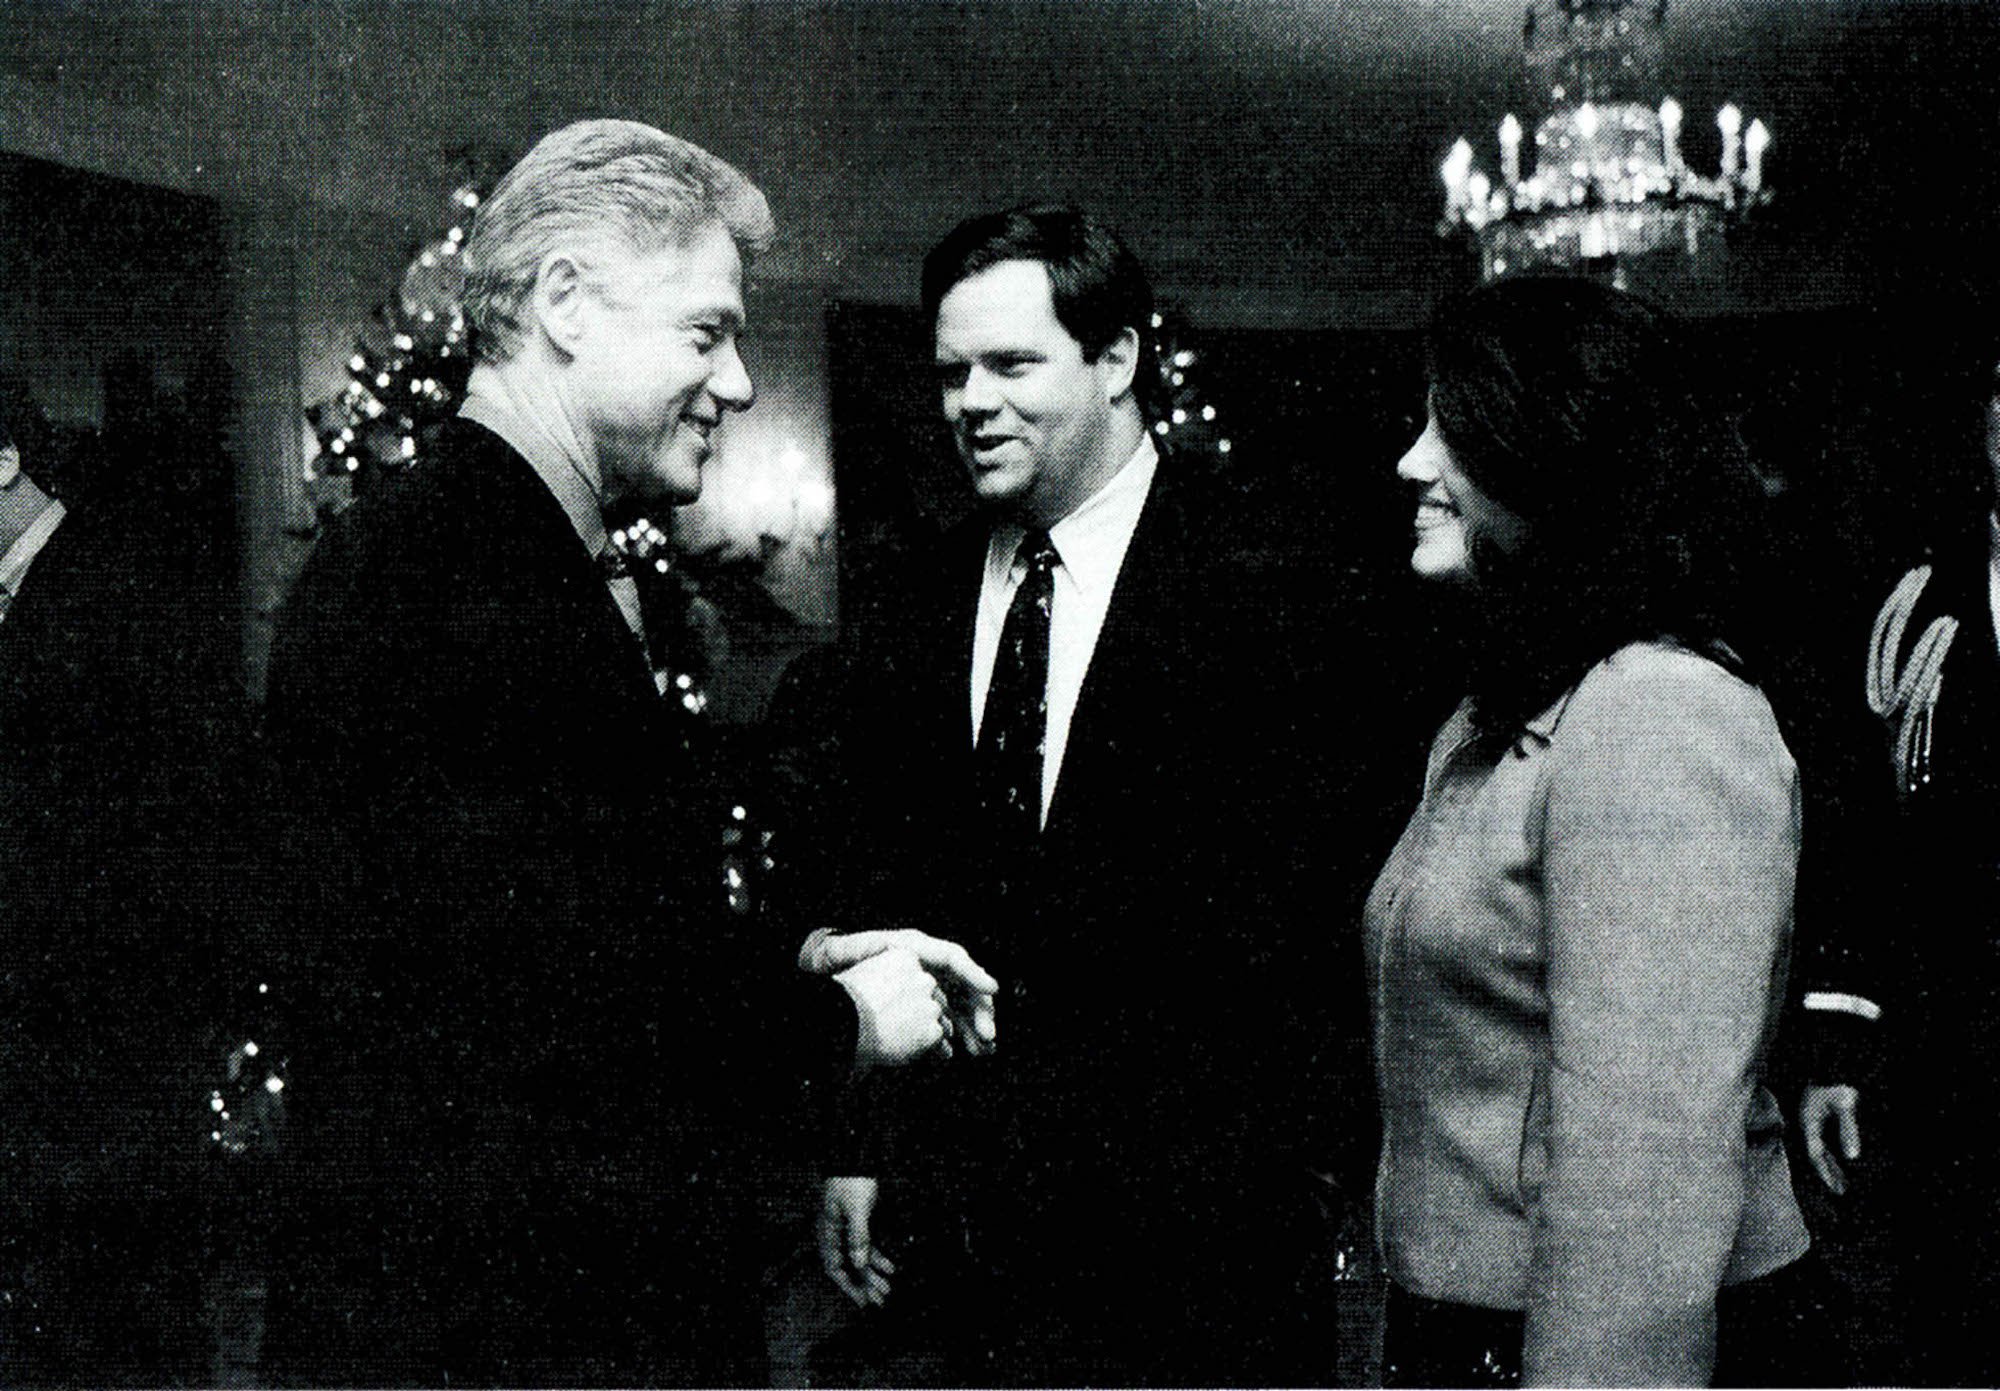 Bill Clinton and Monica Lewinsky attending the White House Christmas party in 1996